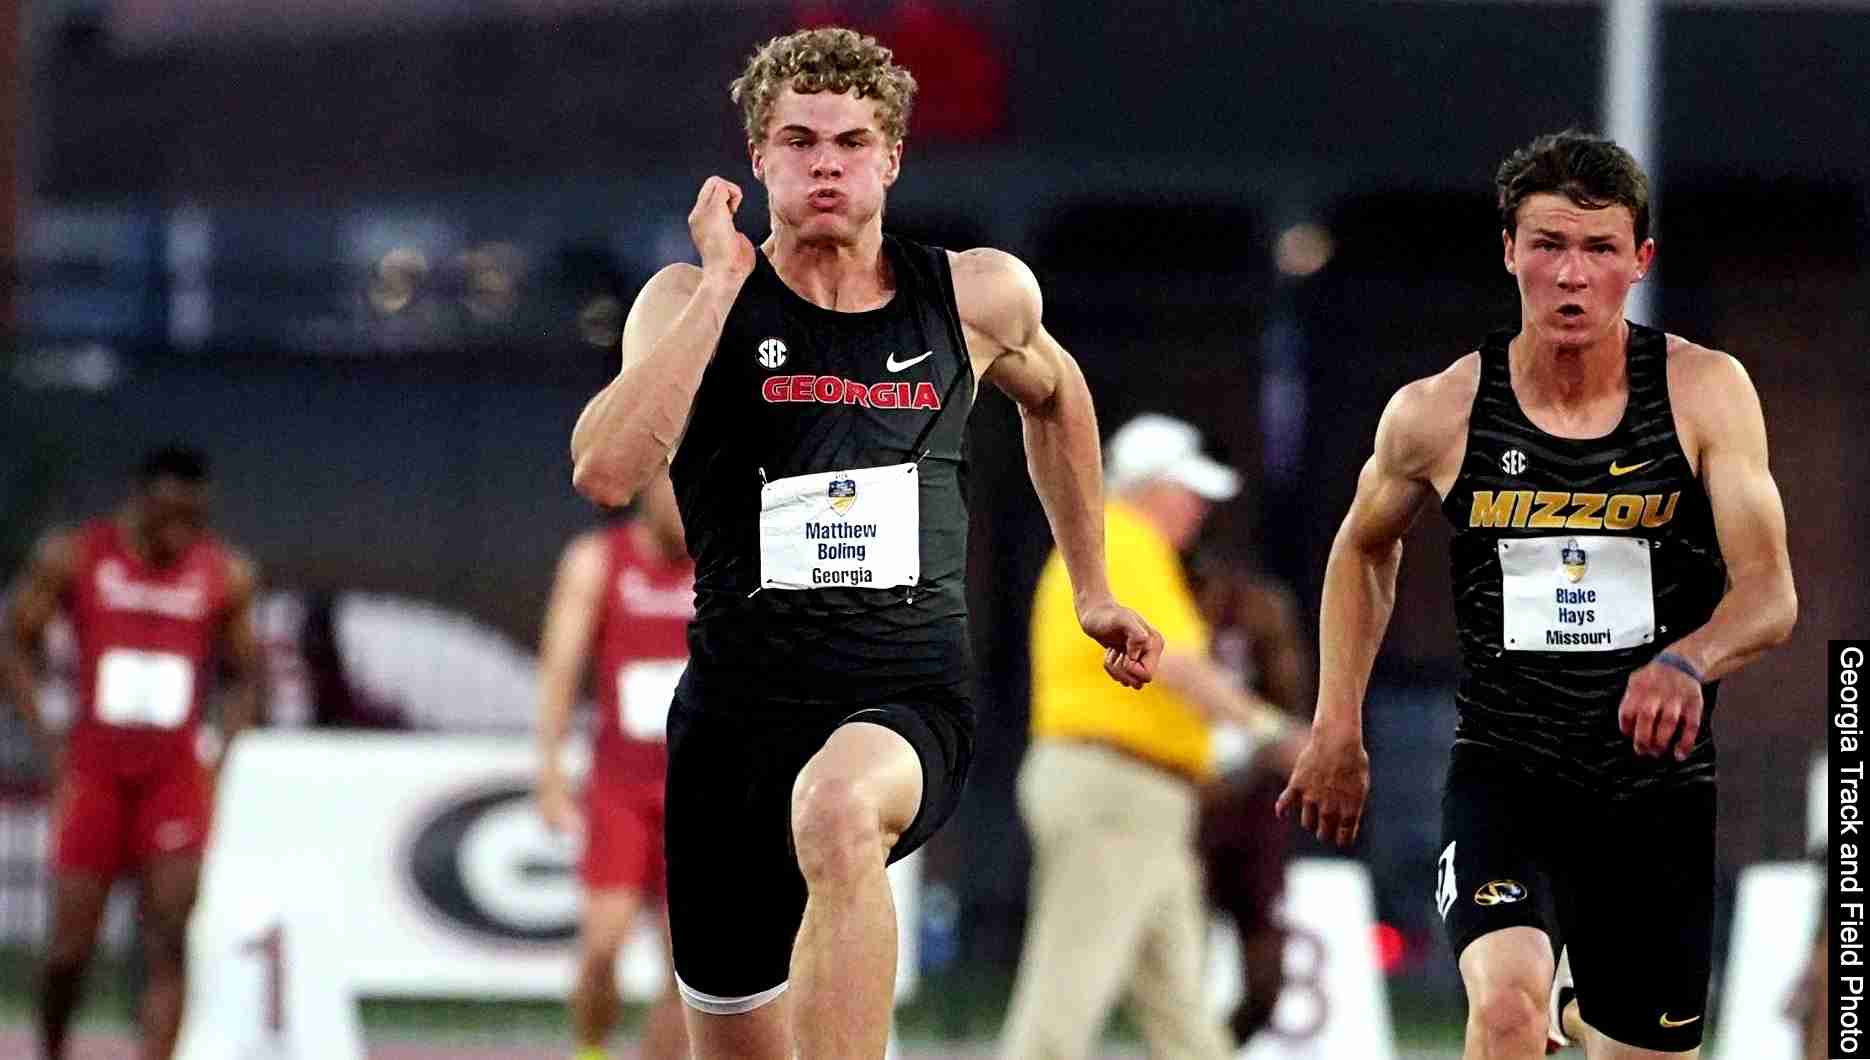 Matthew Boling to open outdoor 200m campaign at Florida Relays 2022